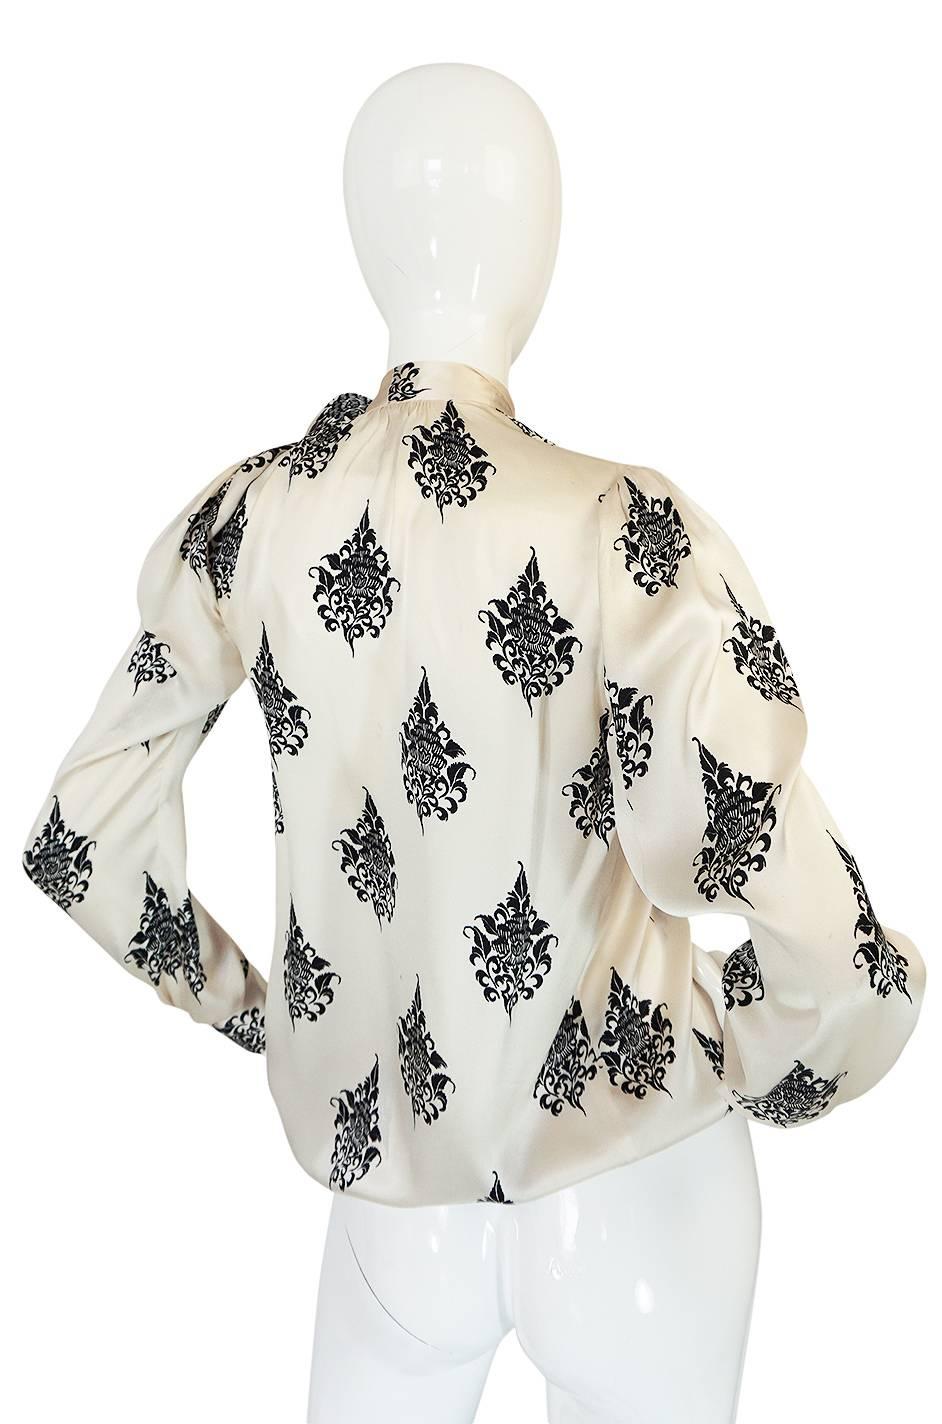 This Yves Saint Laurent silk top is a beauty. The cut is loose and easy and the fabric a very fine silk with a satin finish in a beautiful cream with a black print over its surface. Each sleeve is cut to puff slightly above the button cuffs. The